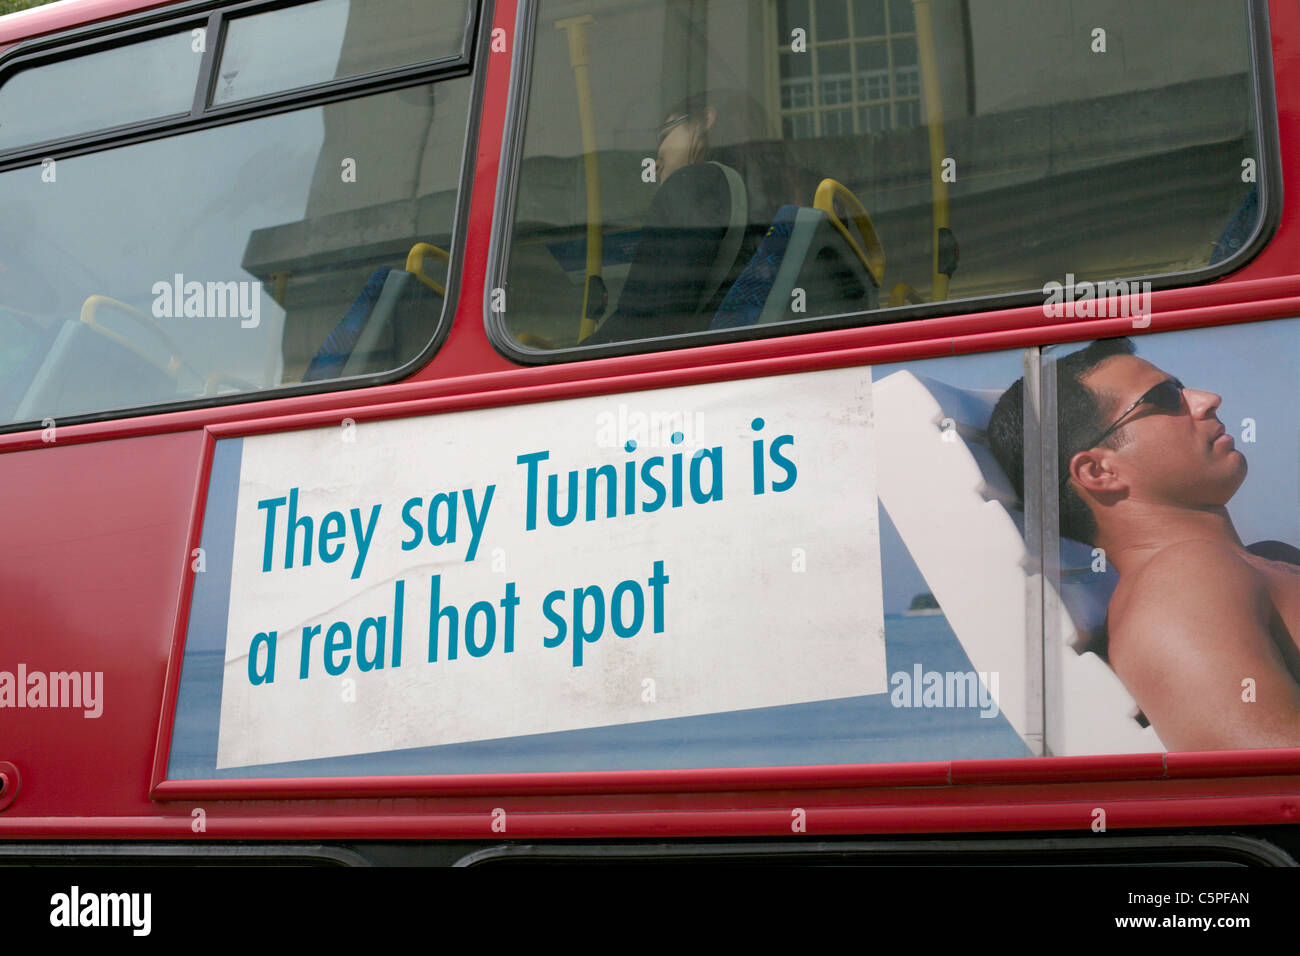 July 2011 London red bus with advertising sign They say Tunisia is a real hot spot Stock Photo